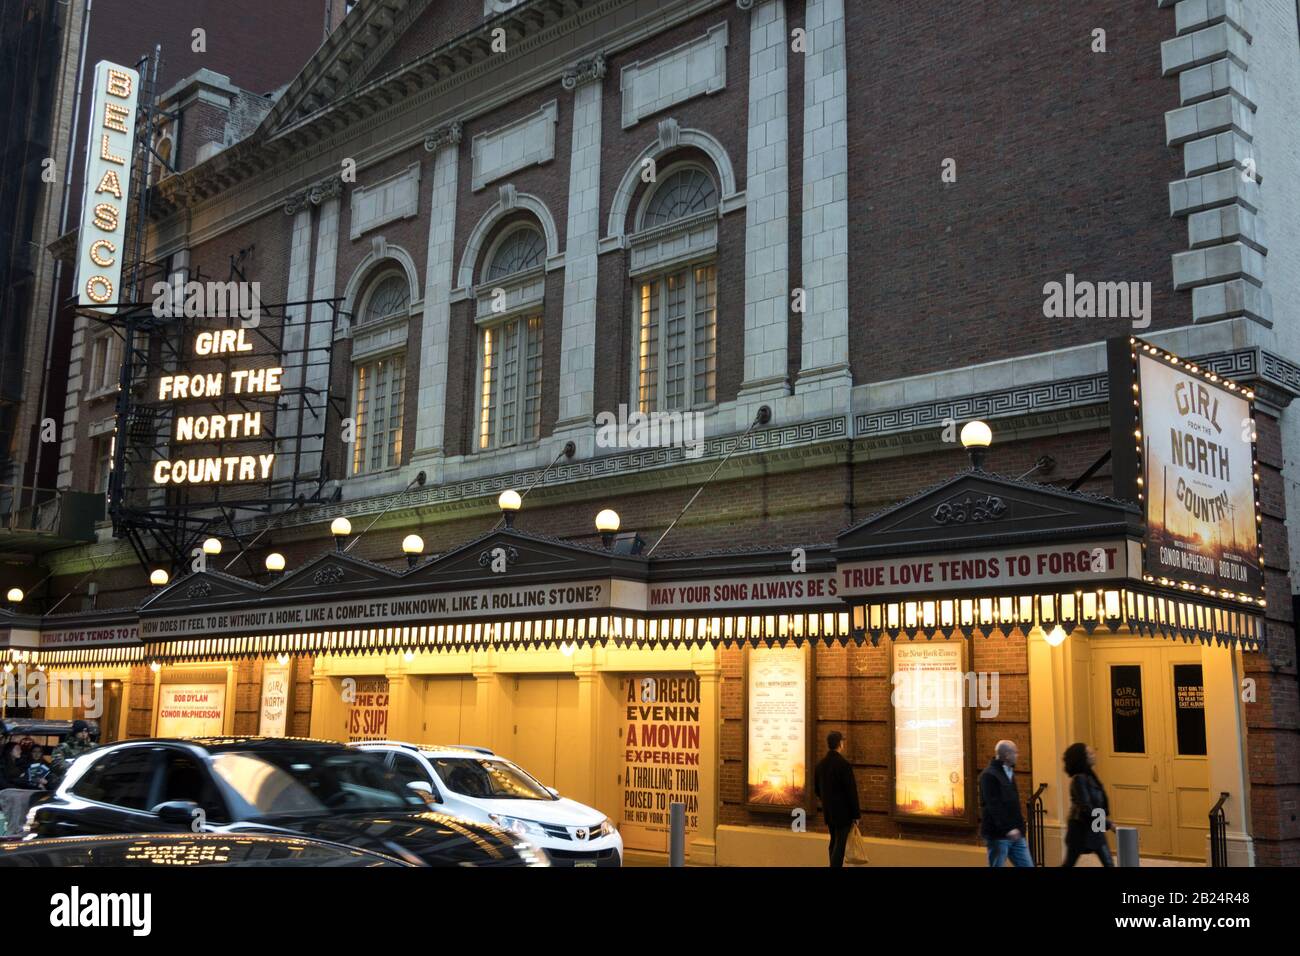 Belasco Theatre Marquee Featuring 'Girl from the North Country', NYC Stockfoto